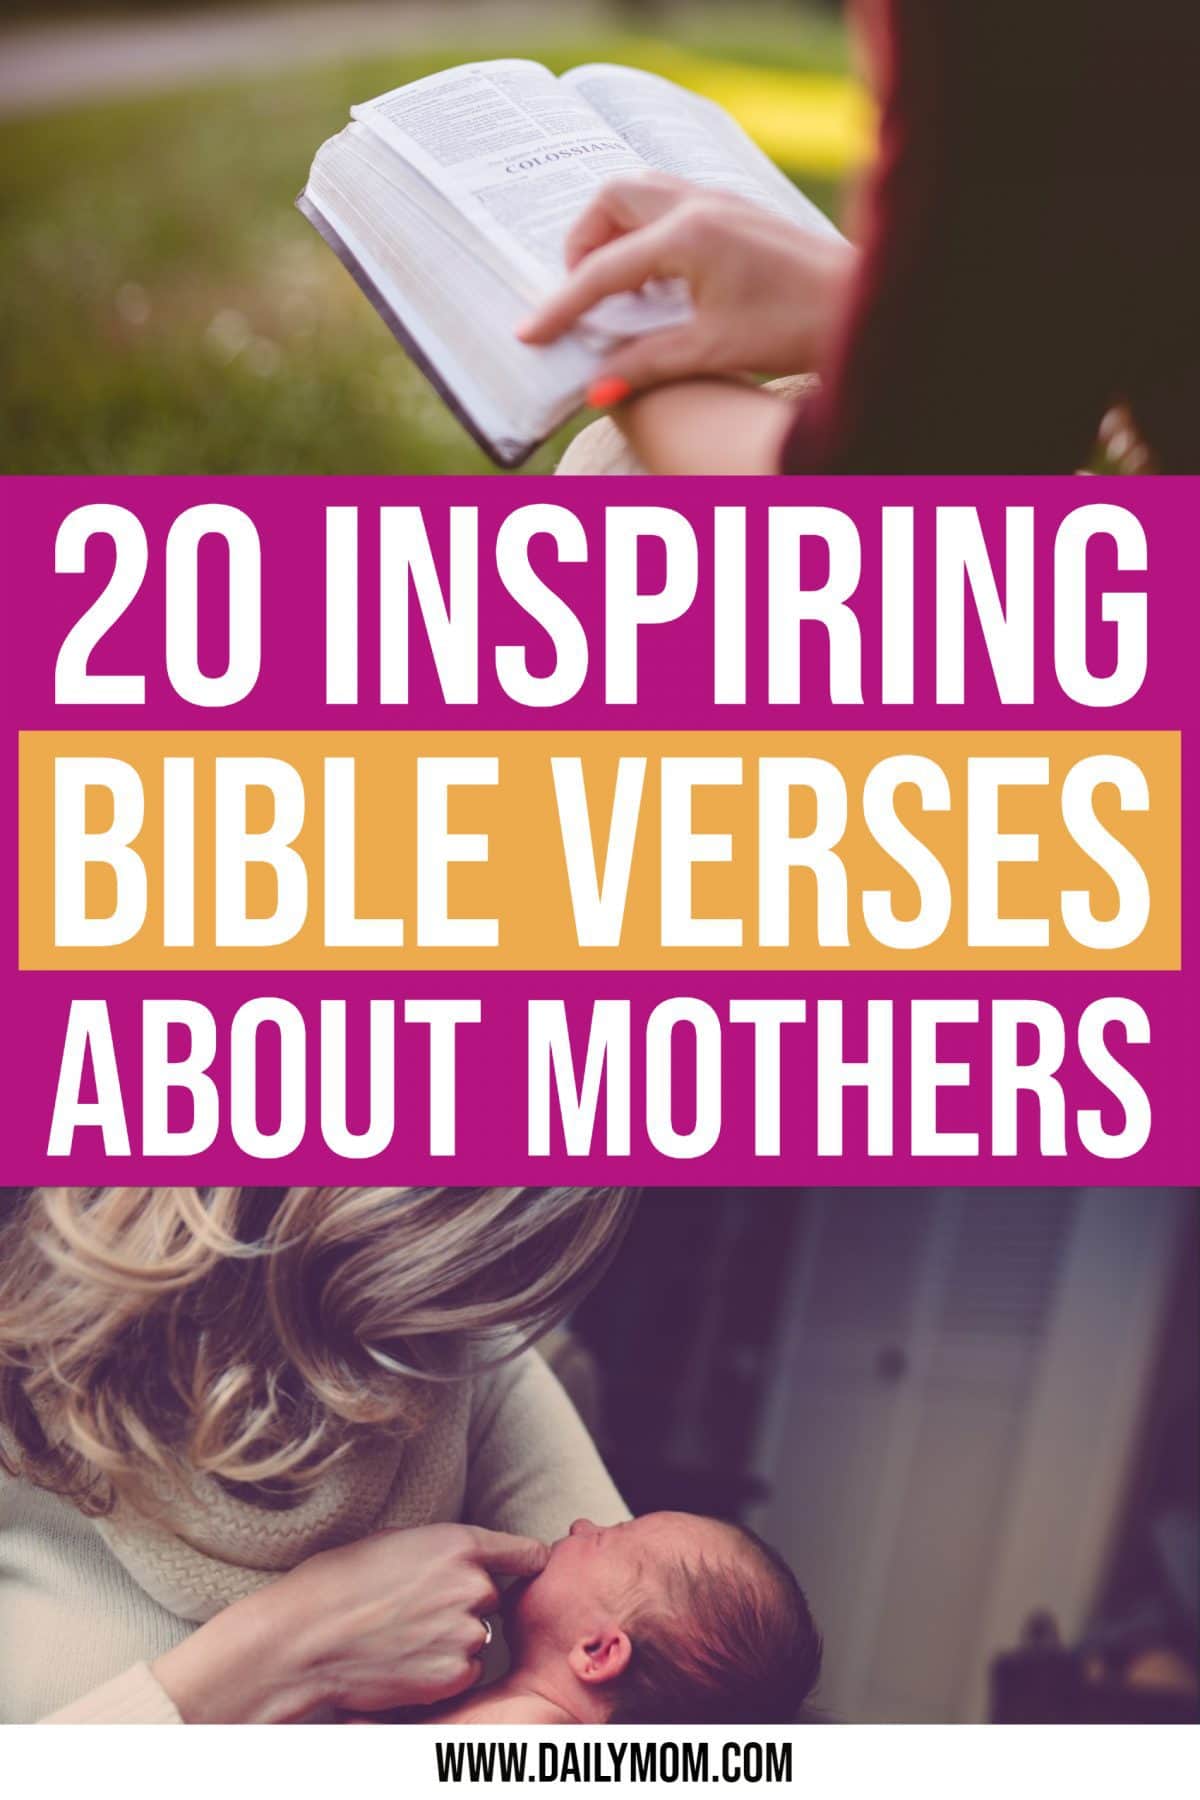 Daily Mom Parent Portal Bible Verses For Mothers